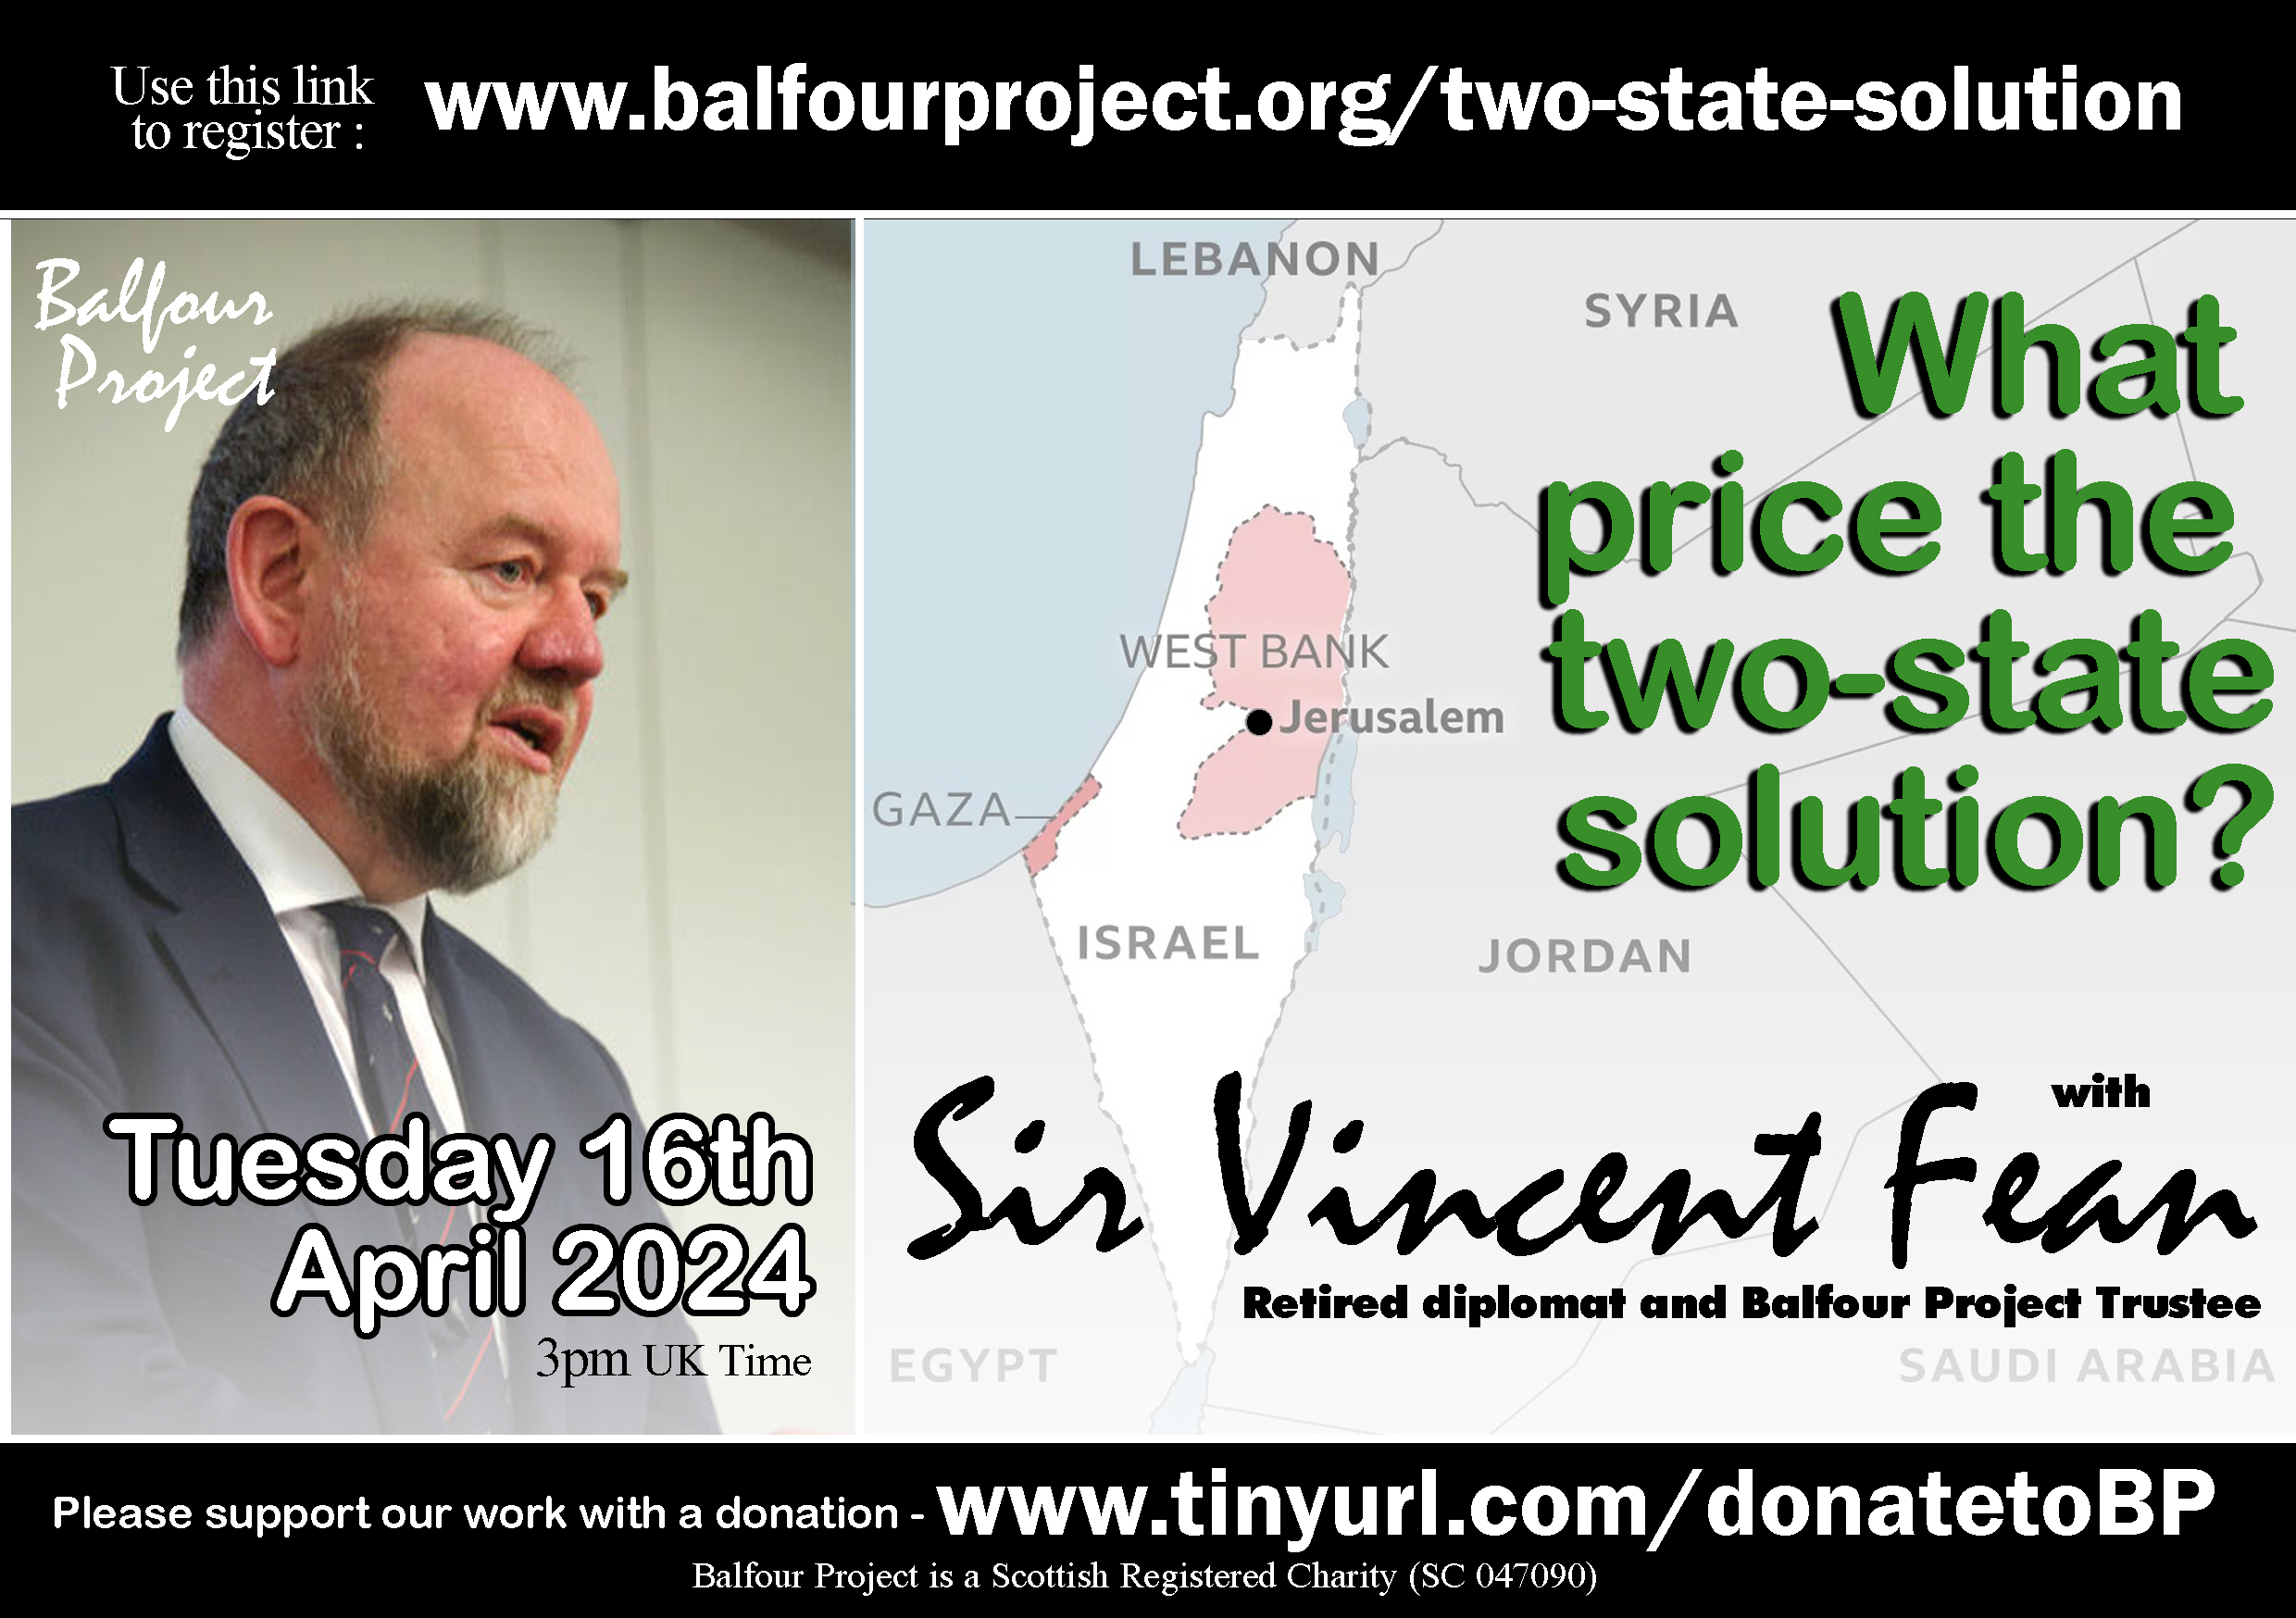 What price the two-state solution?